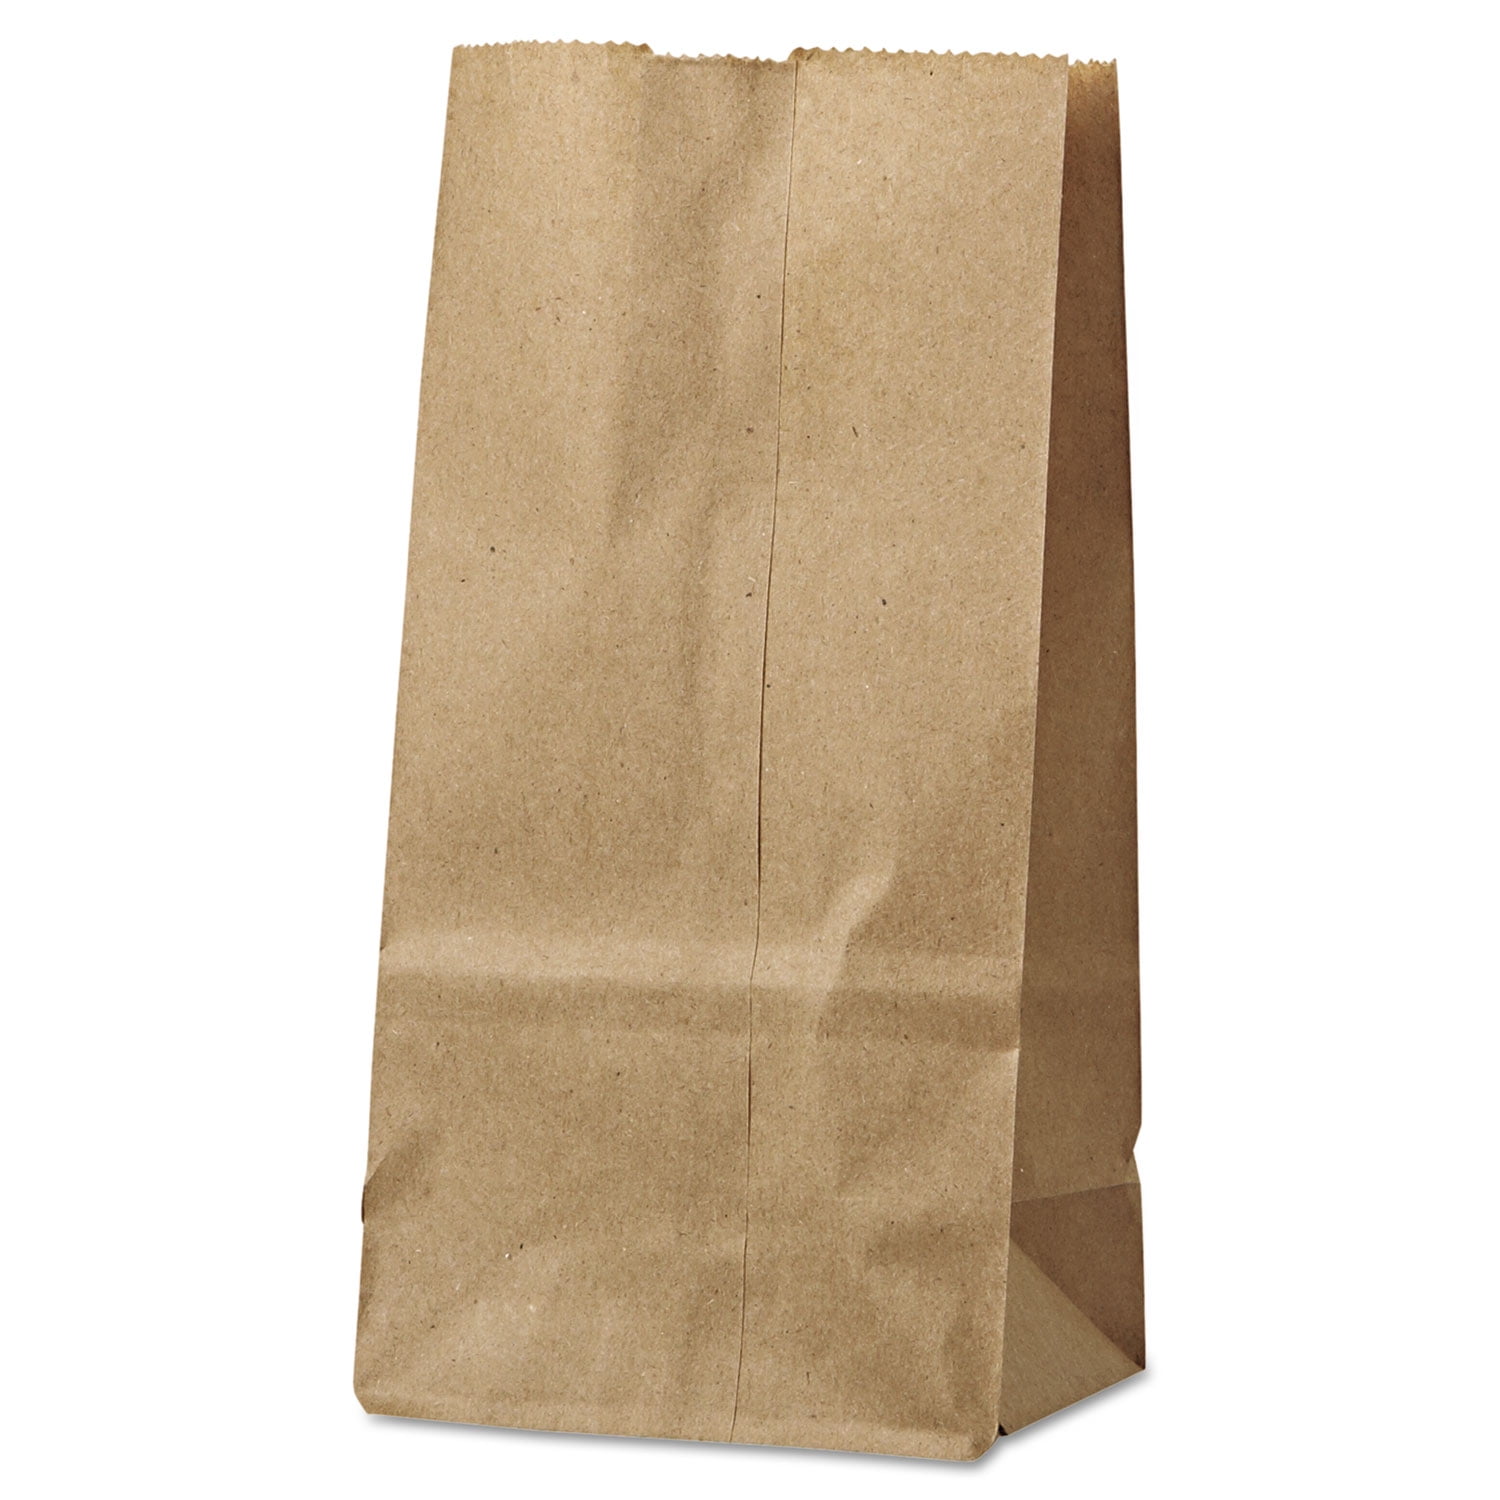 18402 Cpc 2 Lbs Brown Grocery Bags - Case Of 500